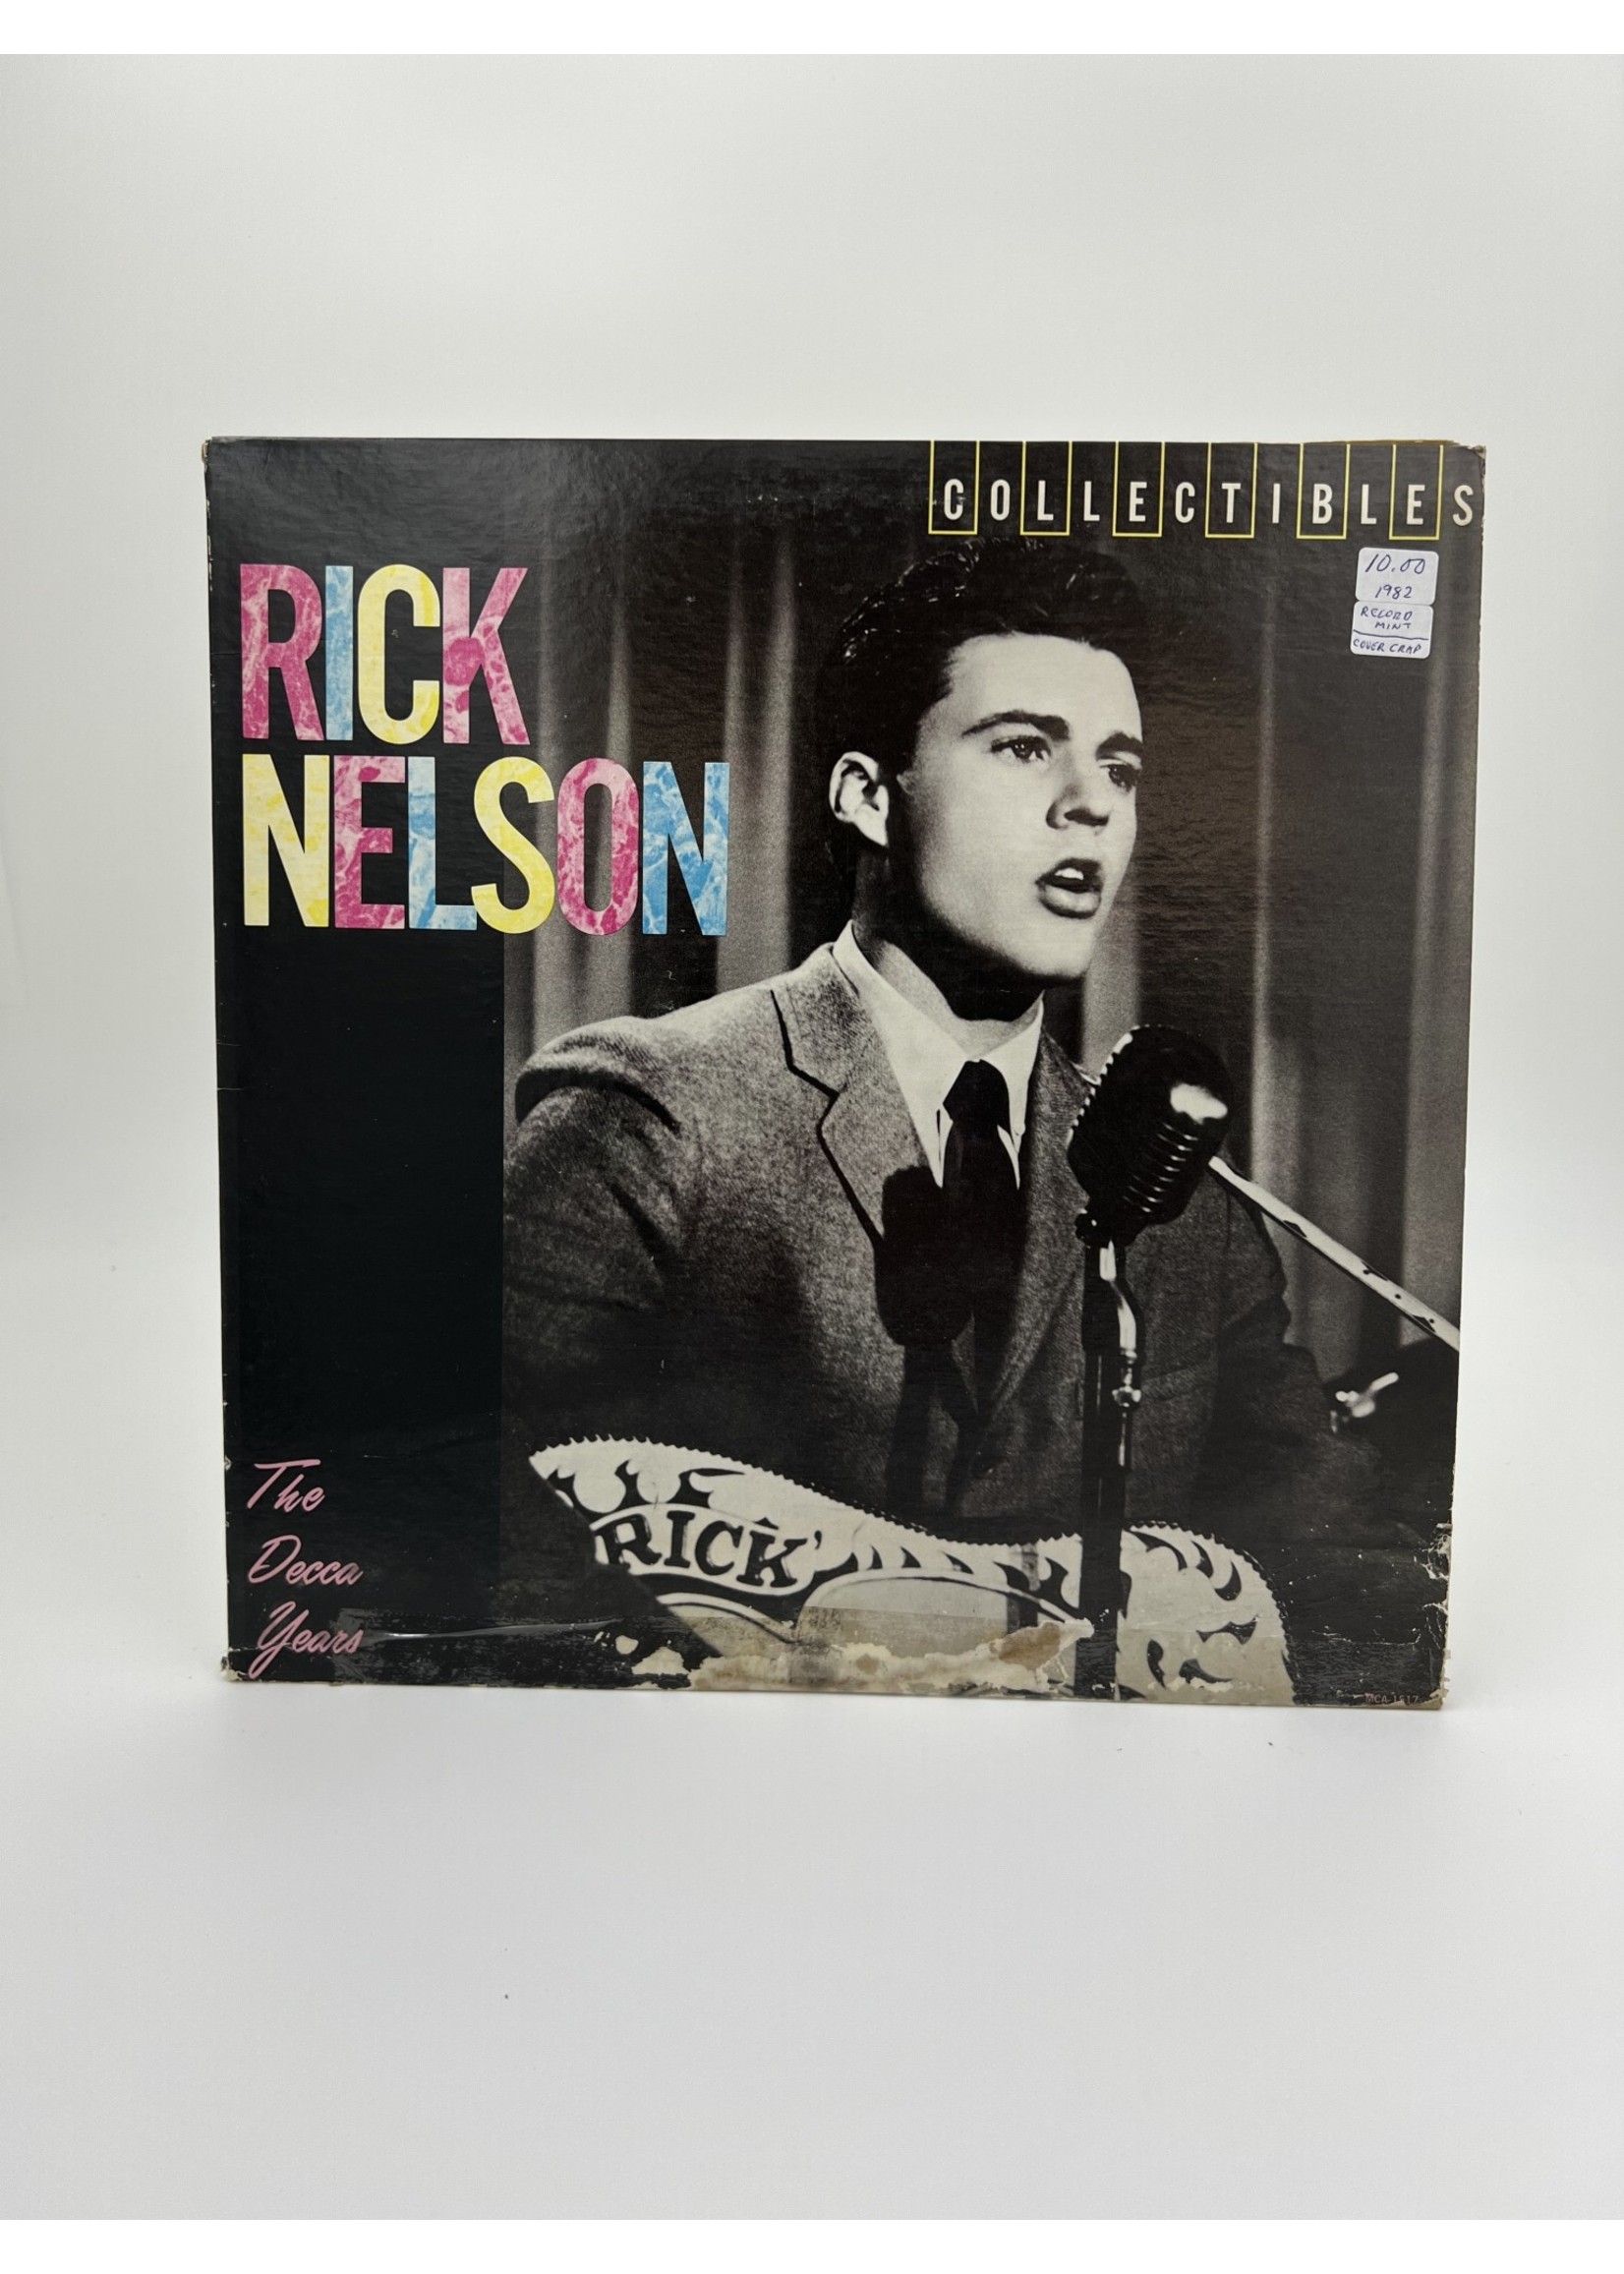 LP Rick Nelson The Decca Years LP RECORD